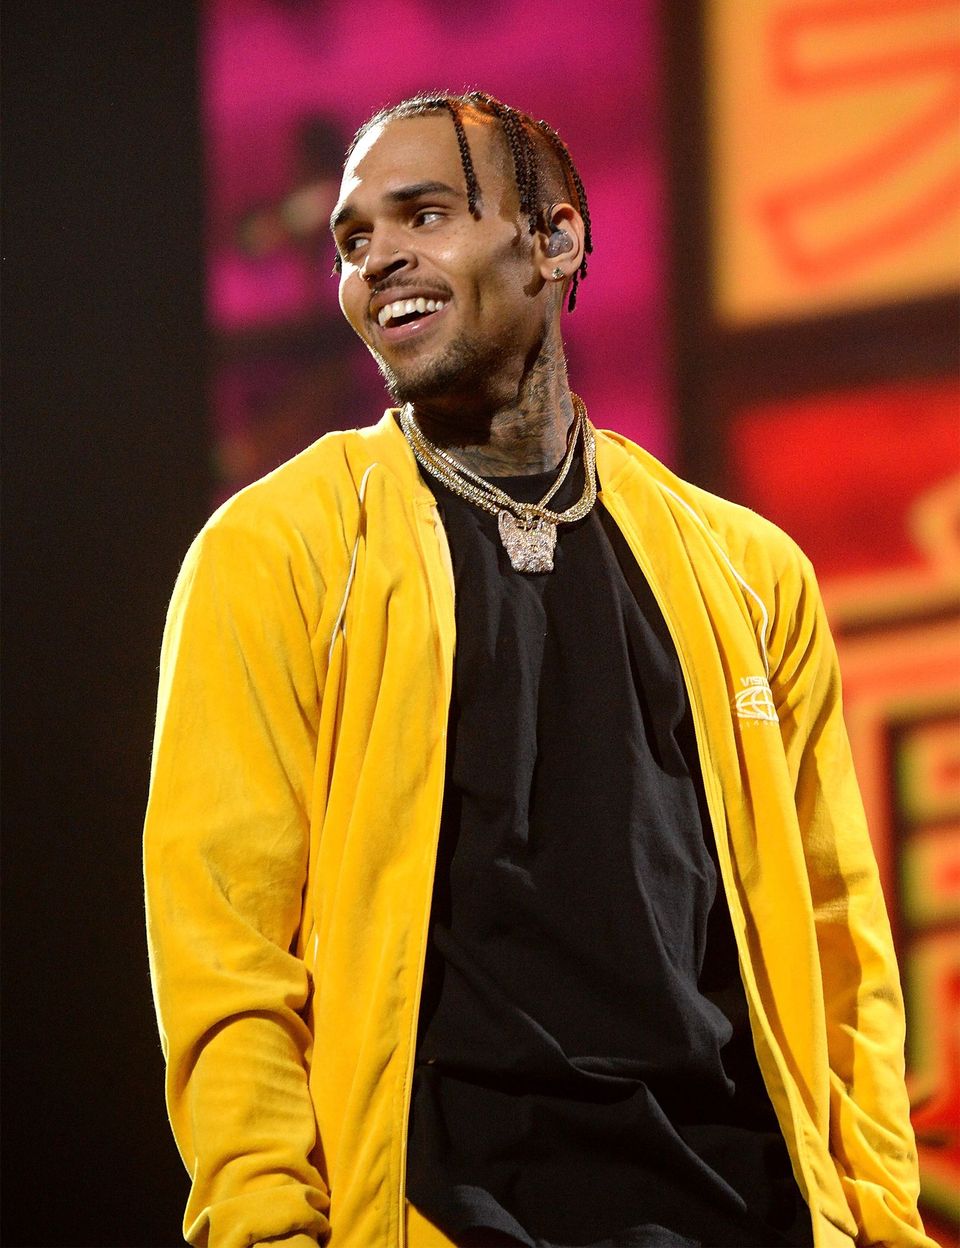 Chris Brown during TIDAL X: Brooklyn at Barclays Center of Brooklyn on October 17, 2017 in New York City. | Photo: Getty Images